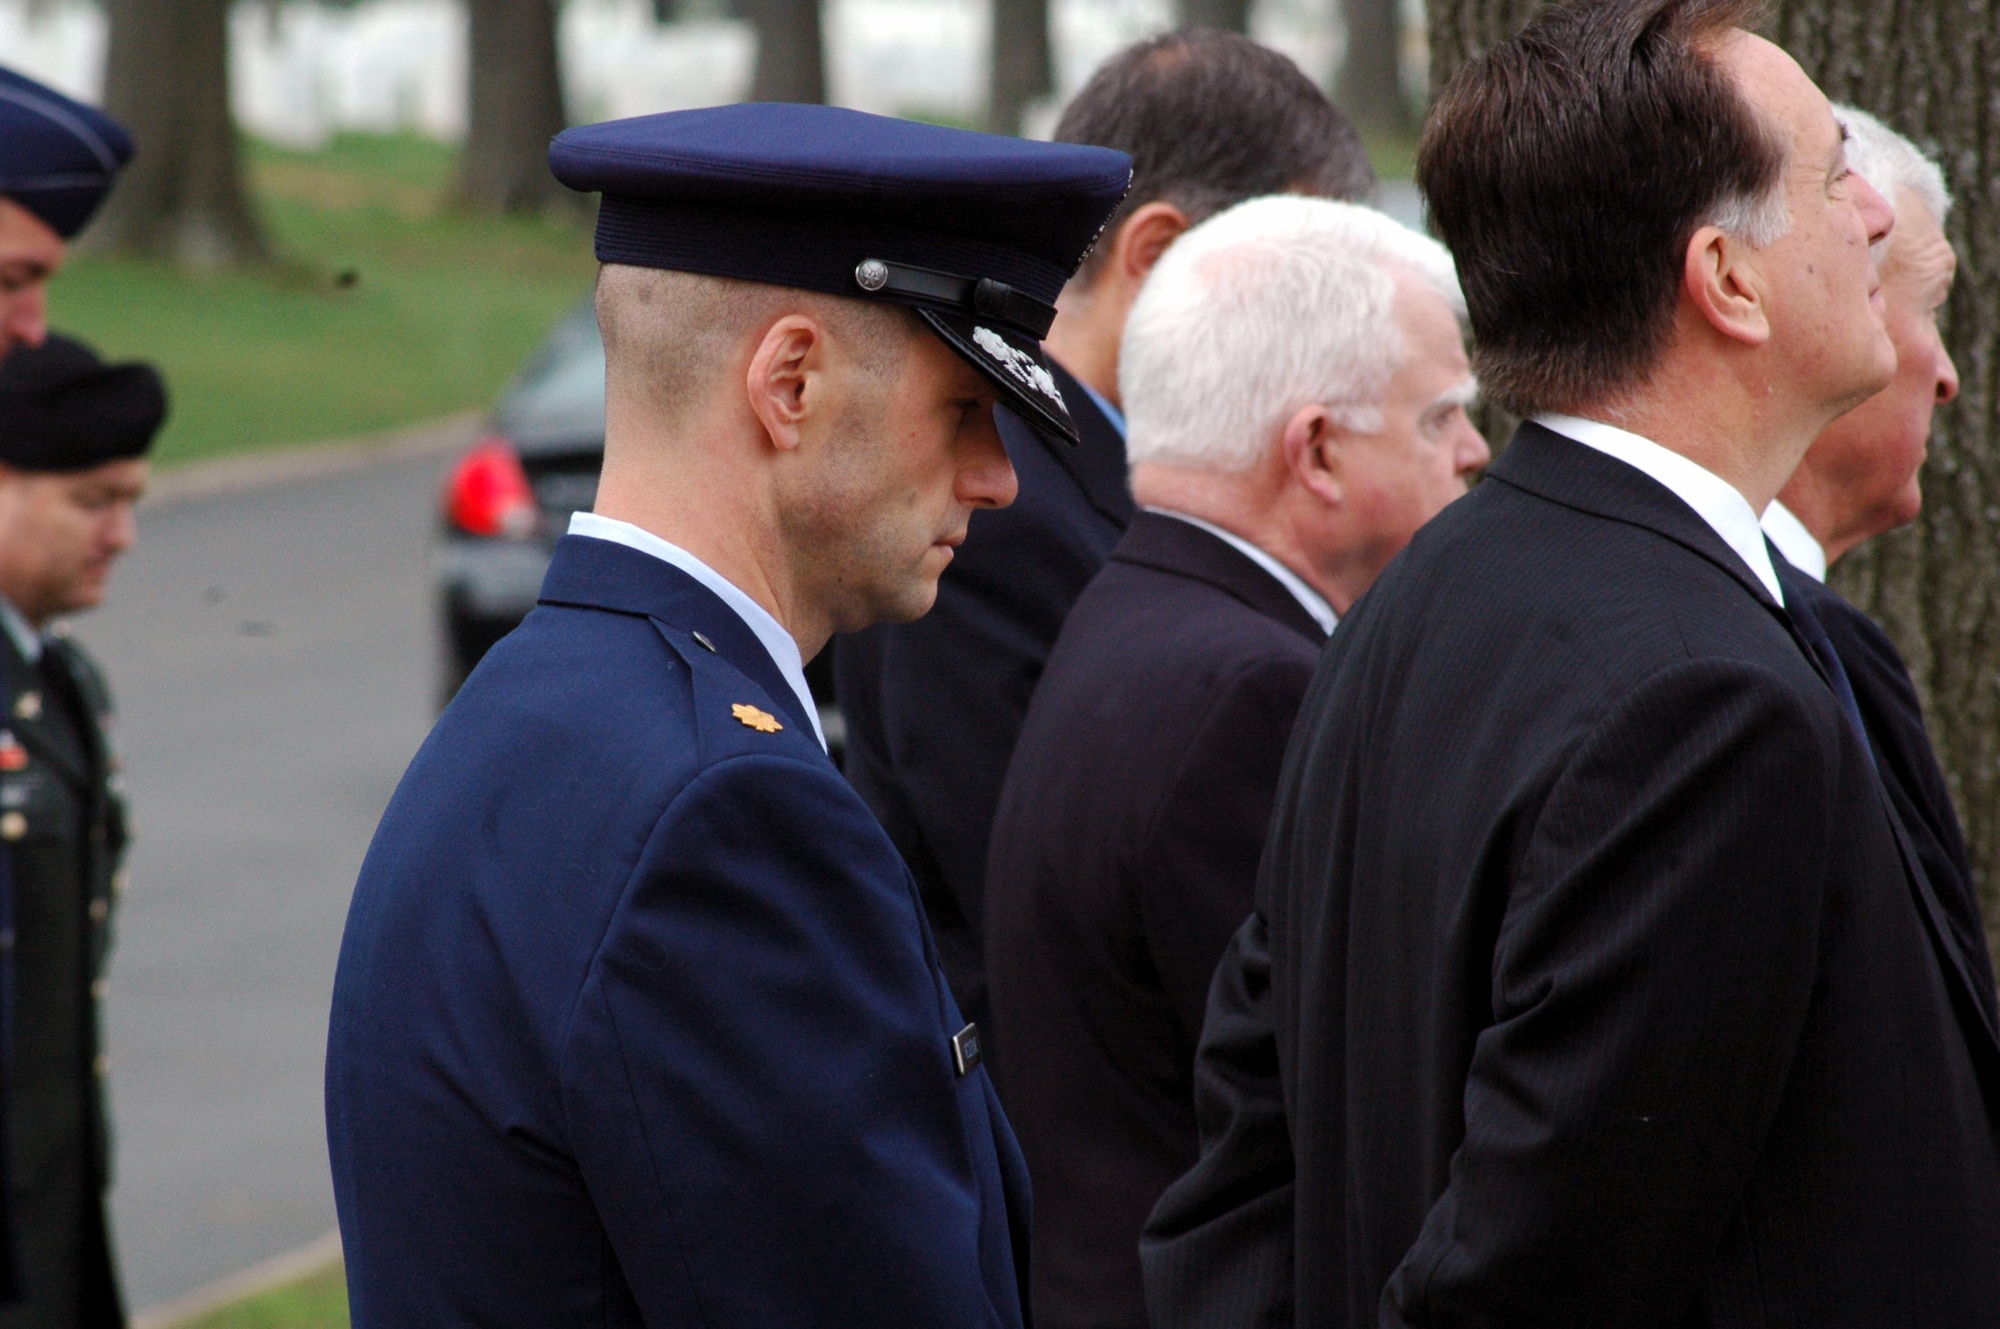 Maj. Phil Heseltine, U.S. Air Force Expeditionary Center executive officer to the commander, Fort Dix, N.J., participates in the funeral for Air Force Maj. Robert F. Woods April 9, 2008, at Arlington National Cemetery, Va.  Earlier that day, Major Heseltine presented a POW/MIA bracelet to the family of Major Woods, whose name is on the bracelet, that he wore for 18 years.  (U.S. Air Force Photo/Tech. Sgt. Scott T. Sturkol)